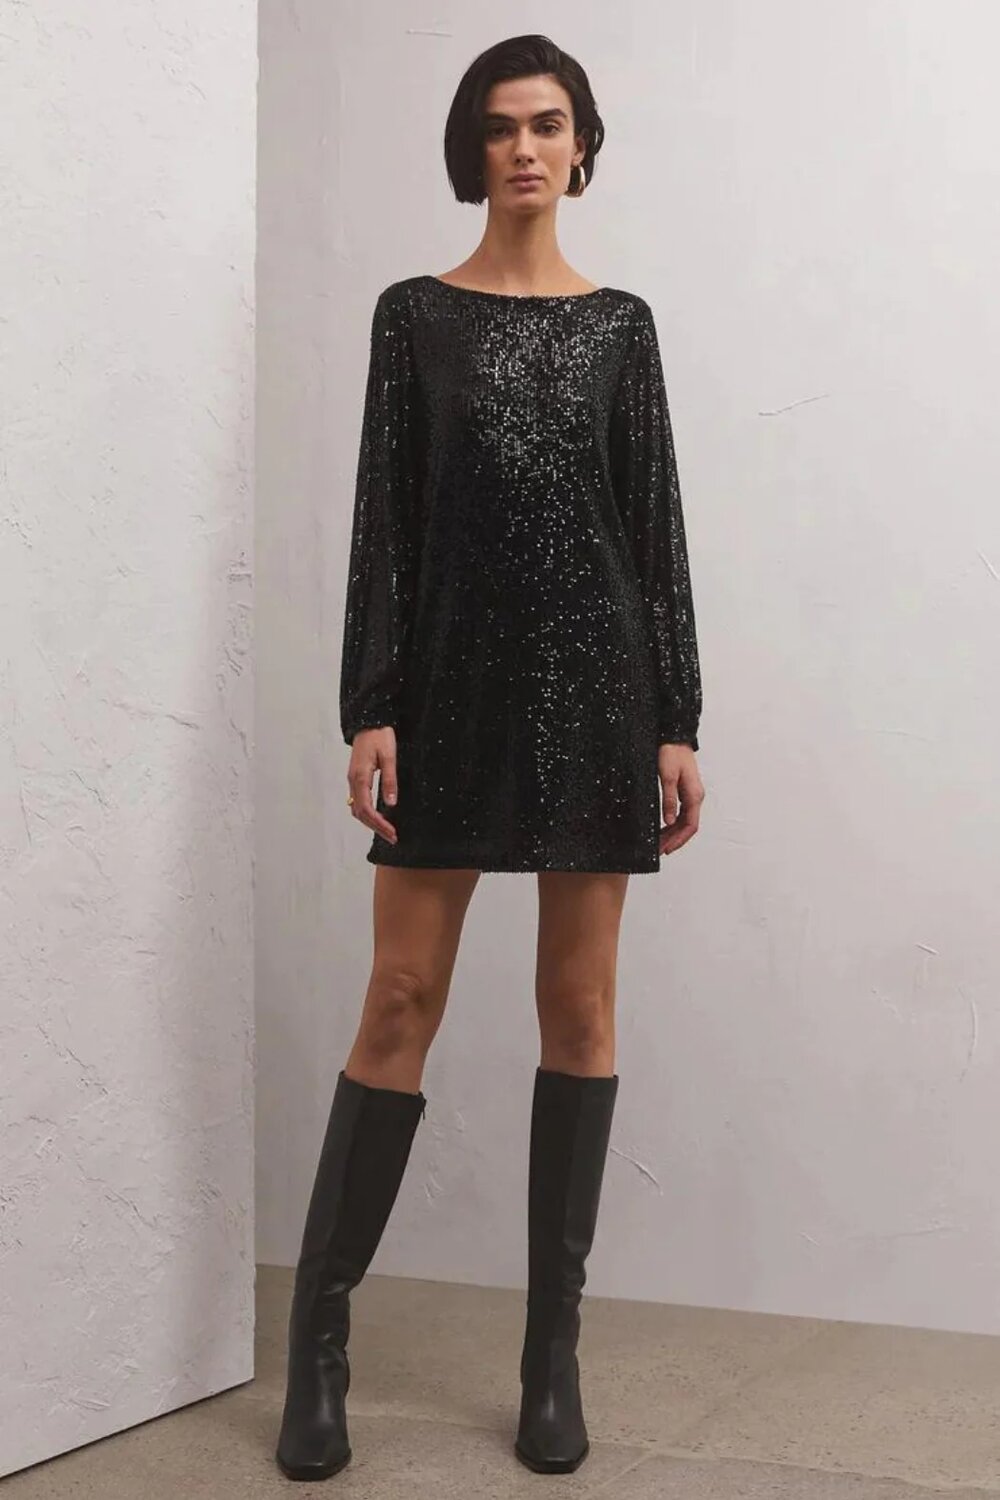 Z Supply Andromeda Sequin Dress from Modern Love